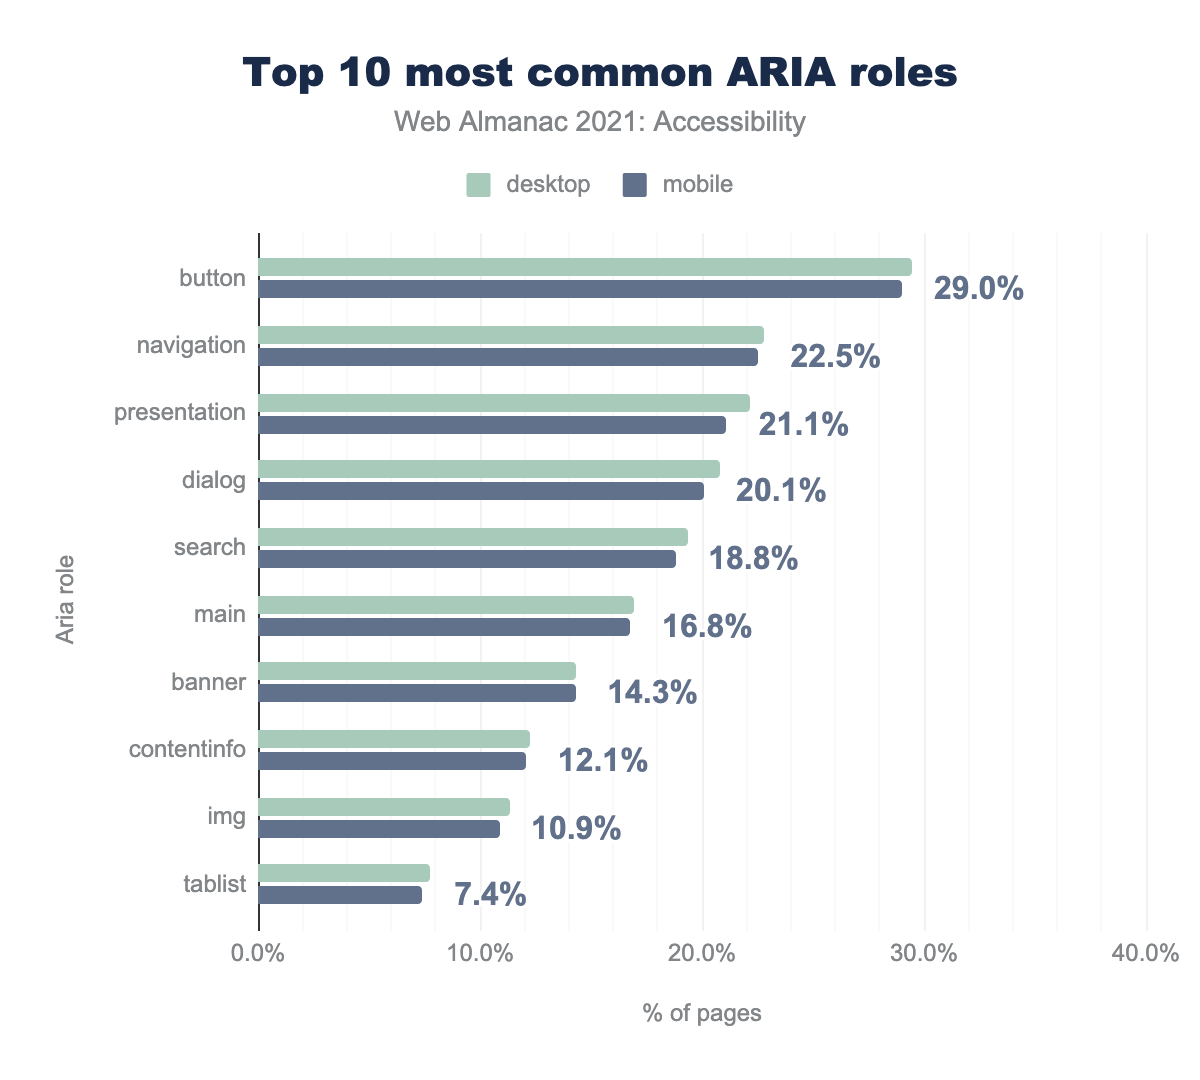 Top 10 most common ARIA roles.